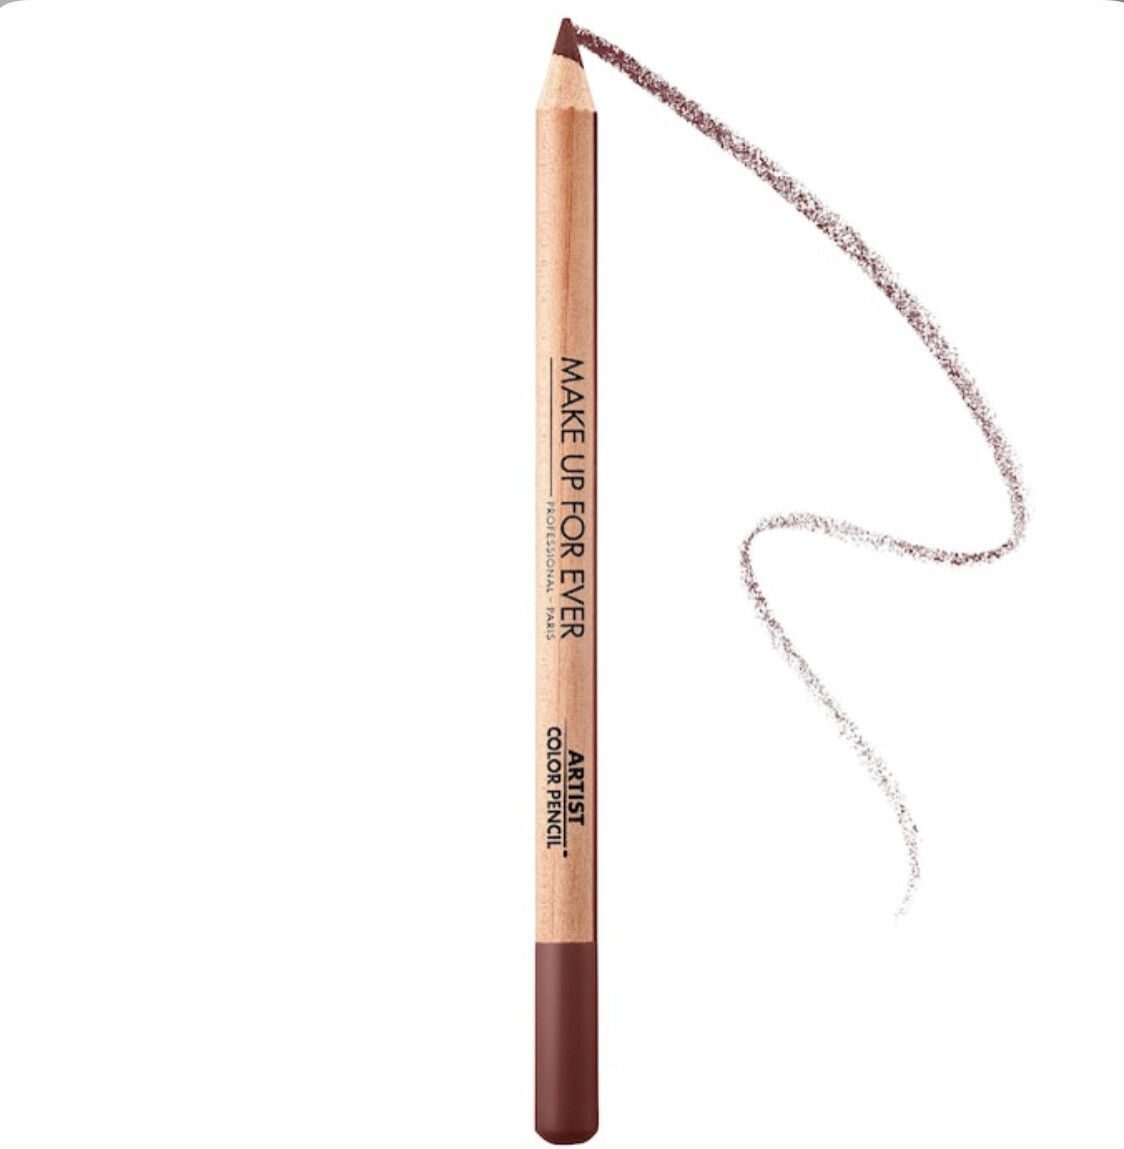 Make Up For Ever - Artist Color Pencil: Eye, Lip & Brow Pencil | 708 Universal Earth